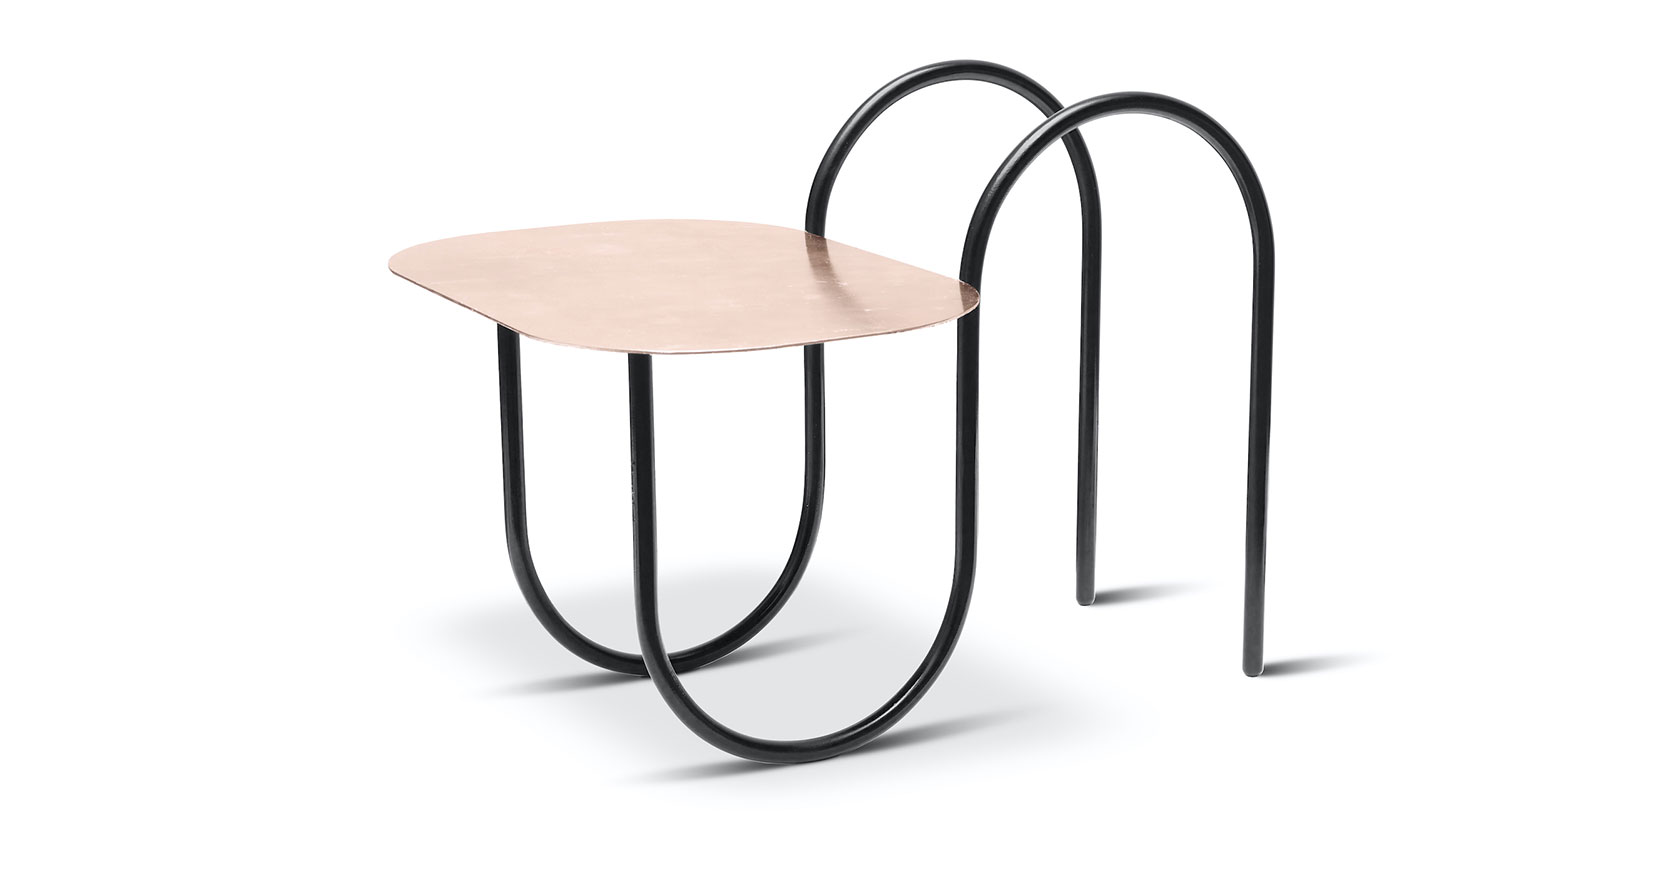 Margaux Kellers sculptural low side table structure in black patinated tubular section iron in a sinuous form that holds a rounded top gilded with pink gold leaf.